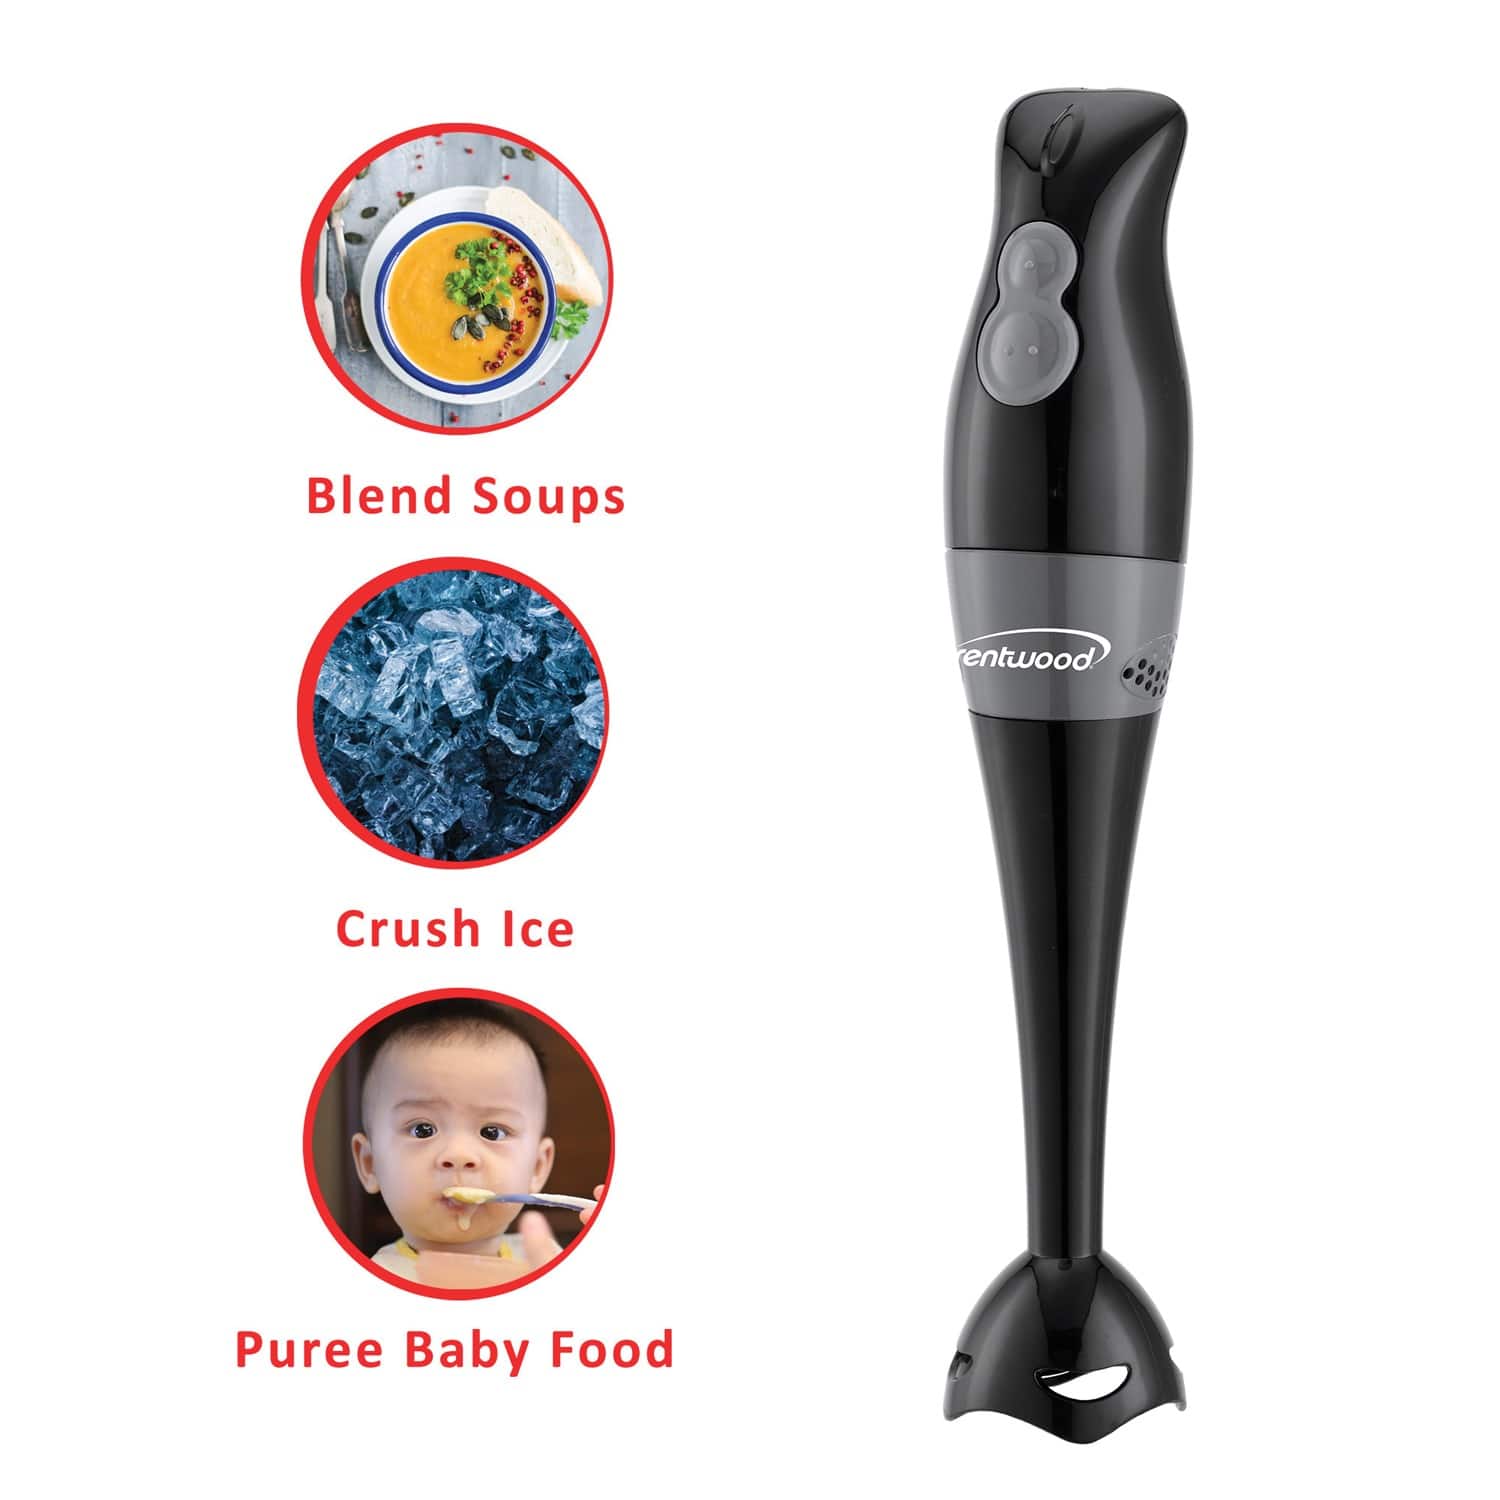 Brentwood Black 2-Speed Hand Blender &#x26; Food Processor with Balloon Whisk